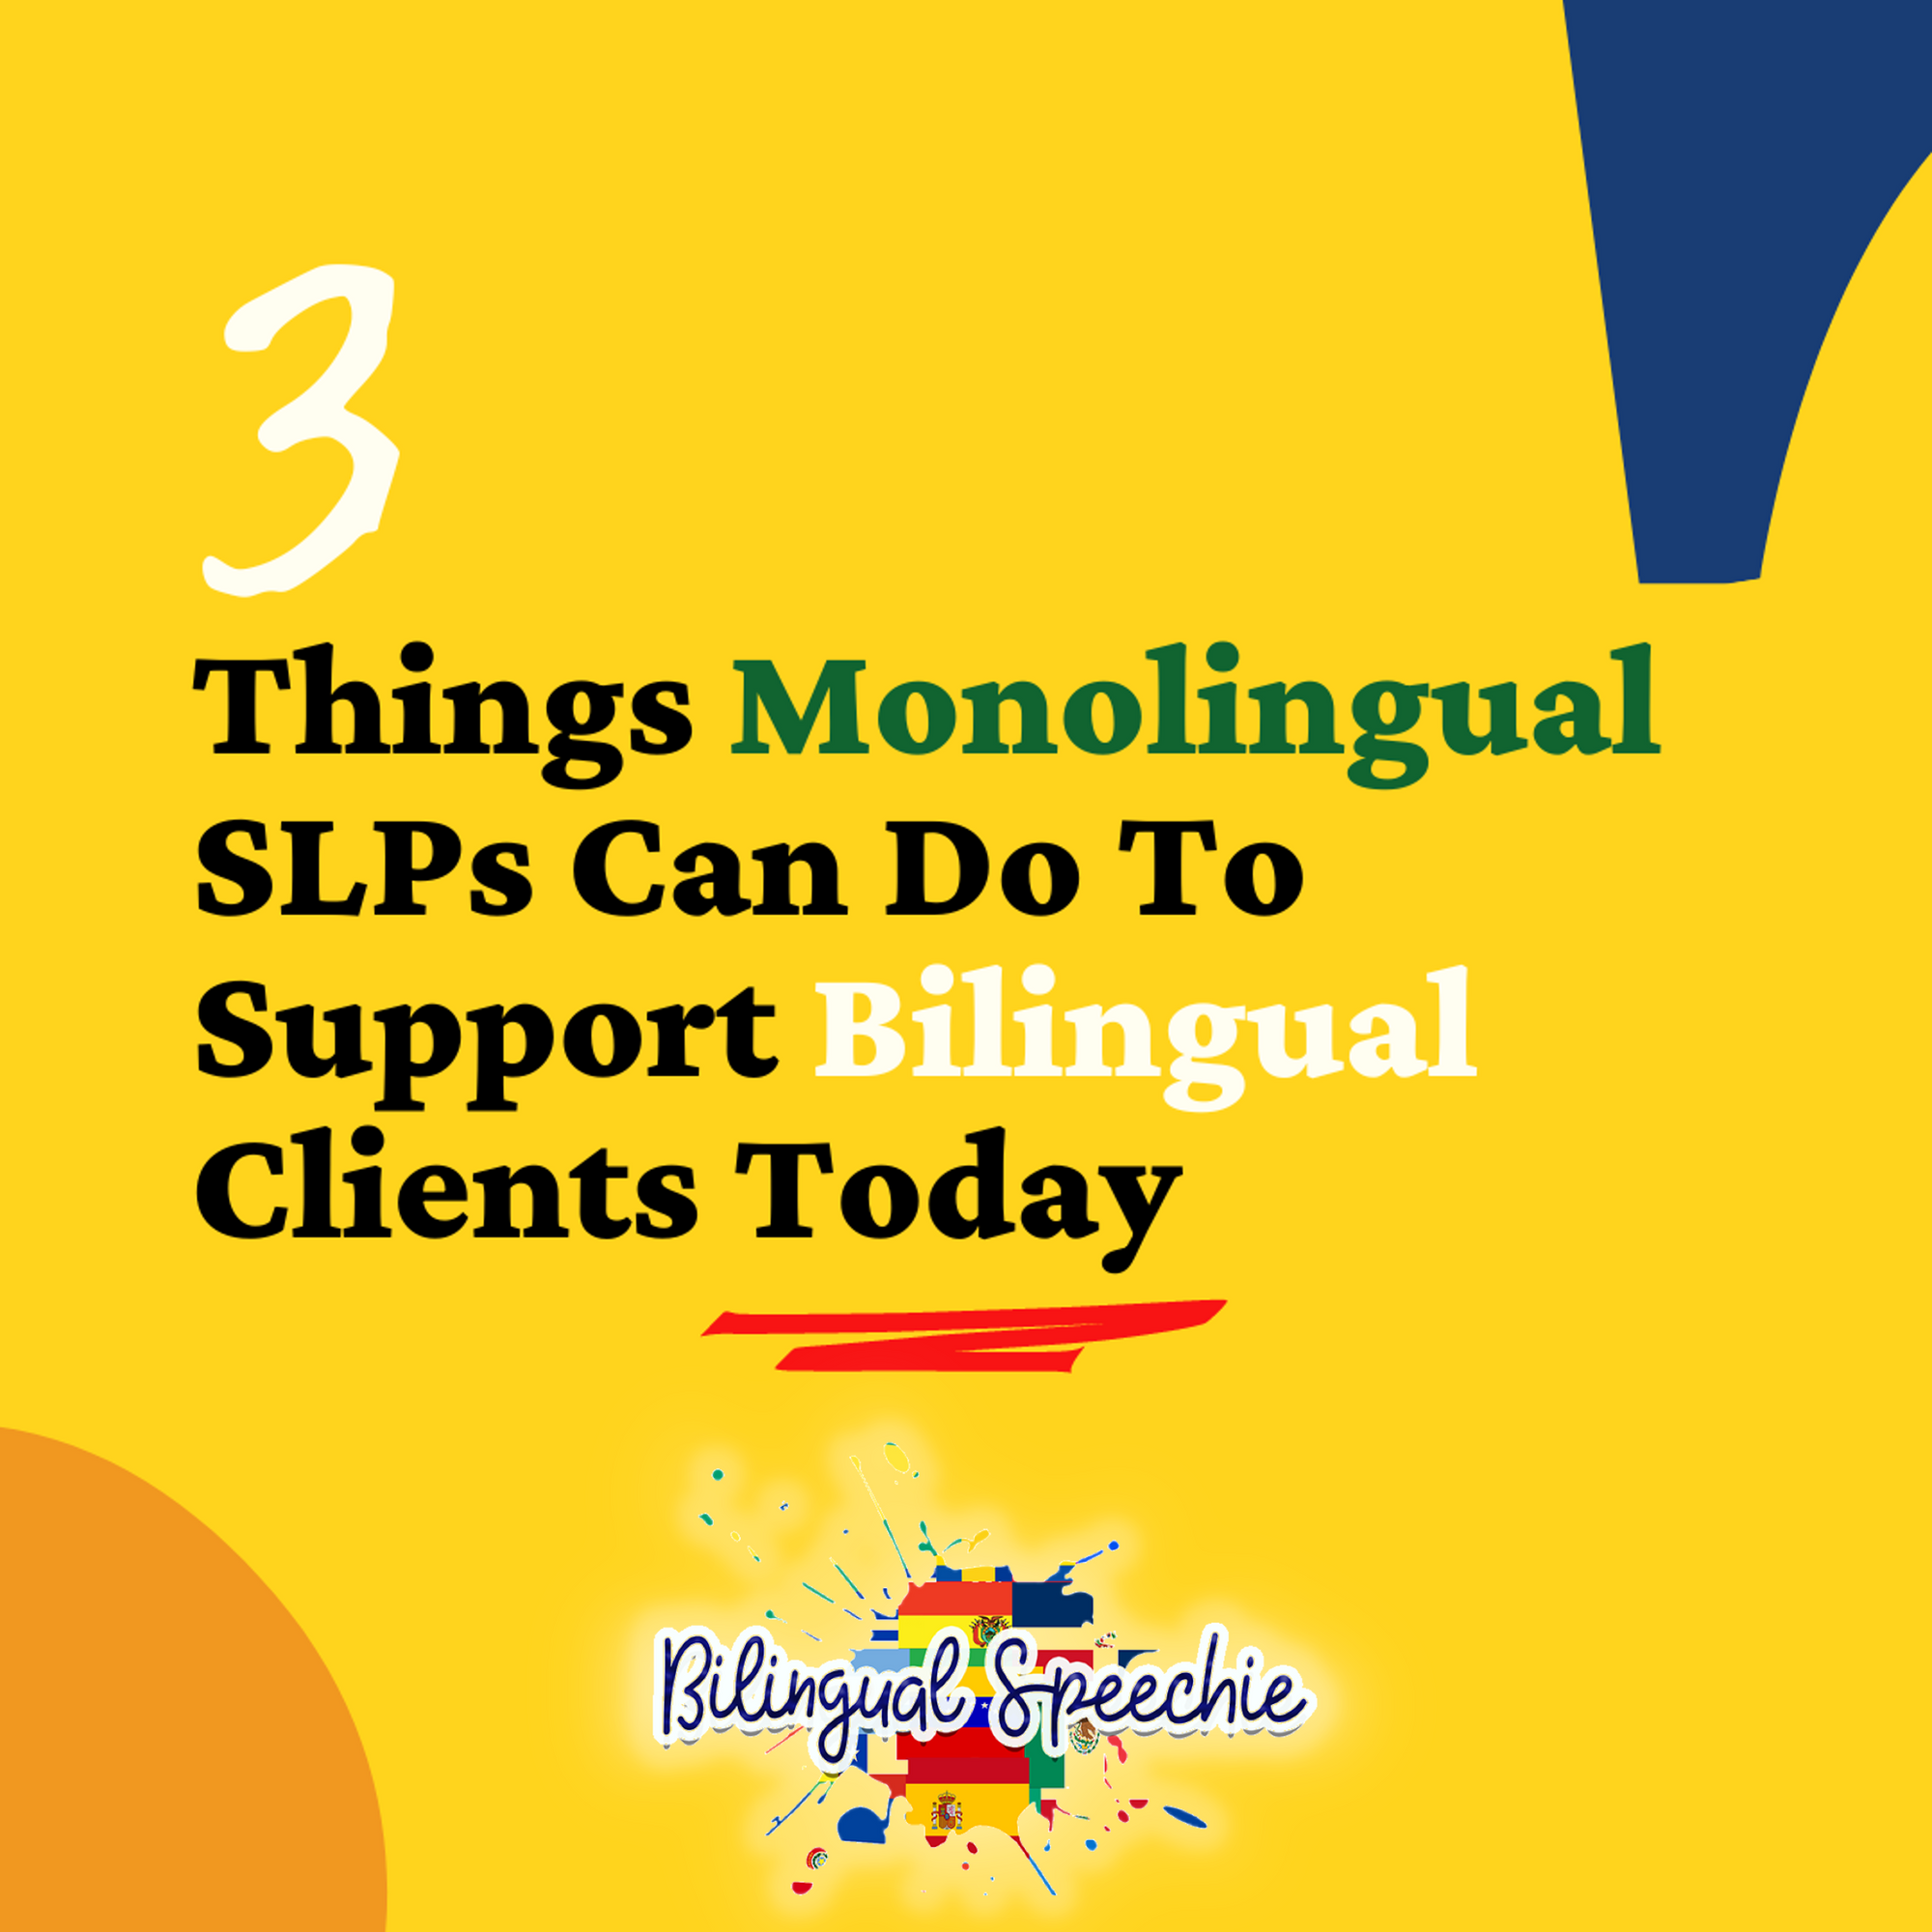 3 Things Monolingual SLPs Can Do To Support Bilingual Clients Today